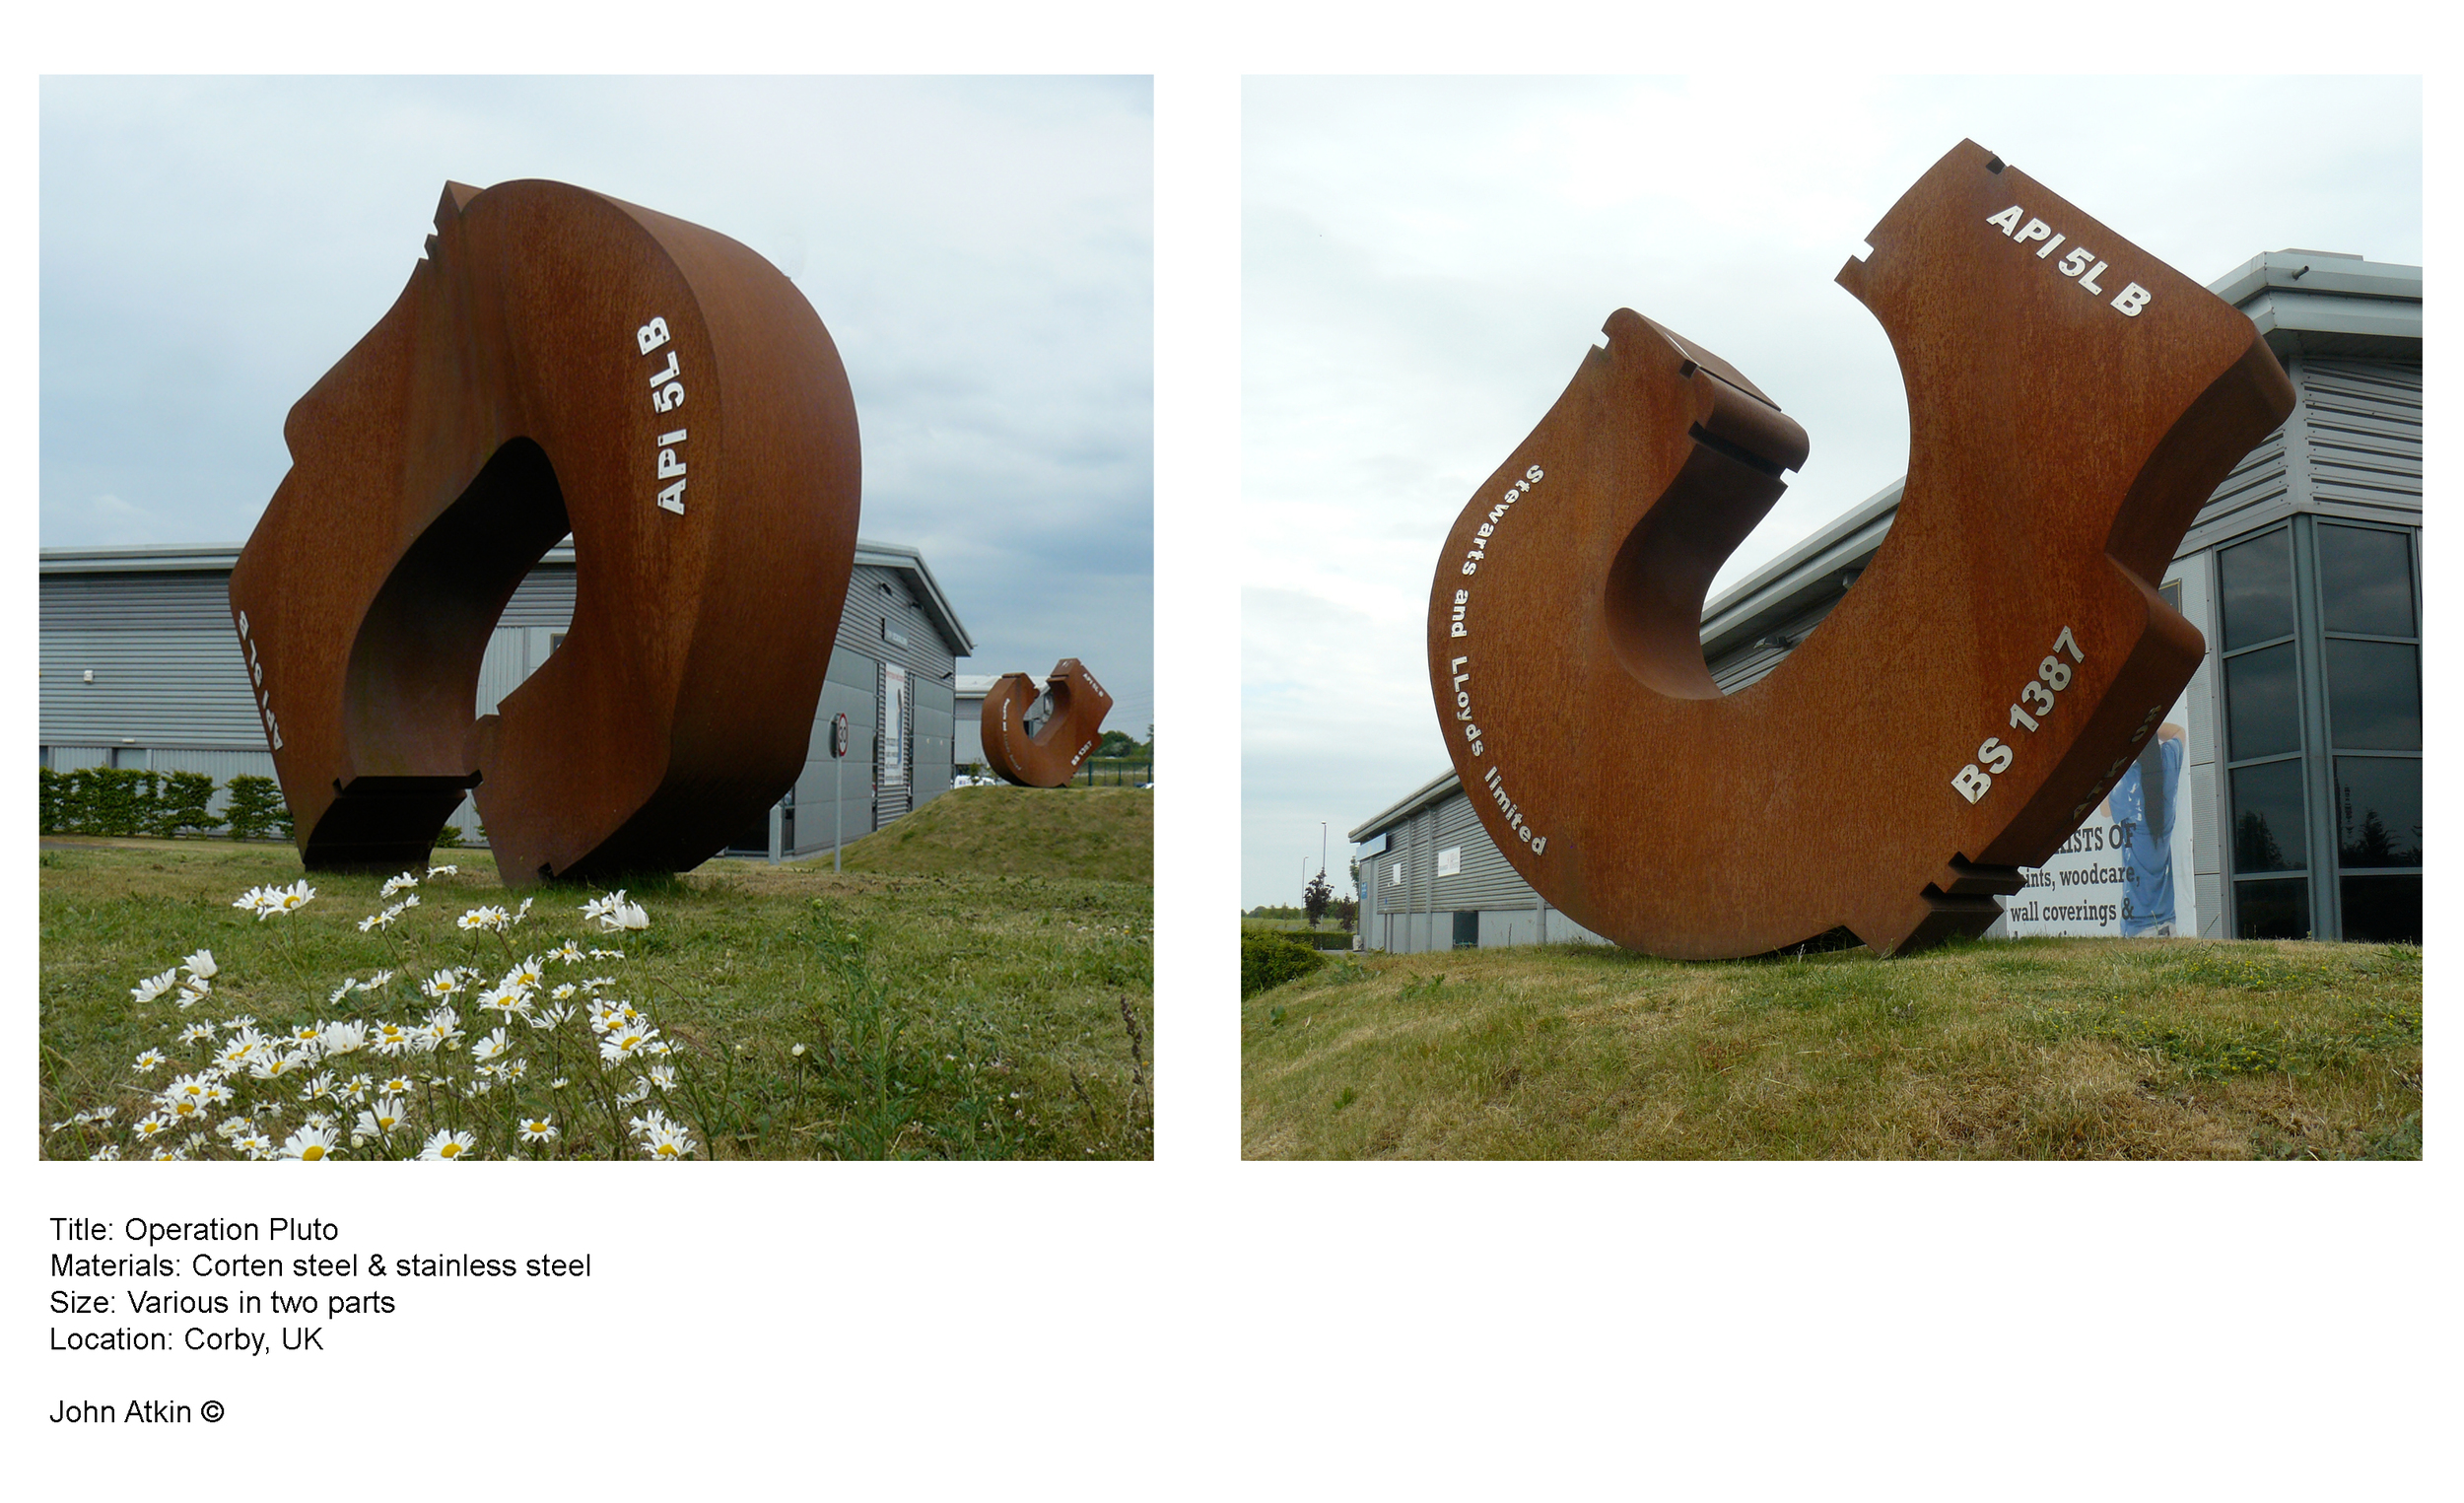 2.Operation Pluto_Corby_UK_Corten steel and stainless steel.jpg